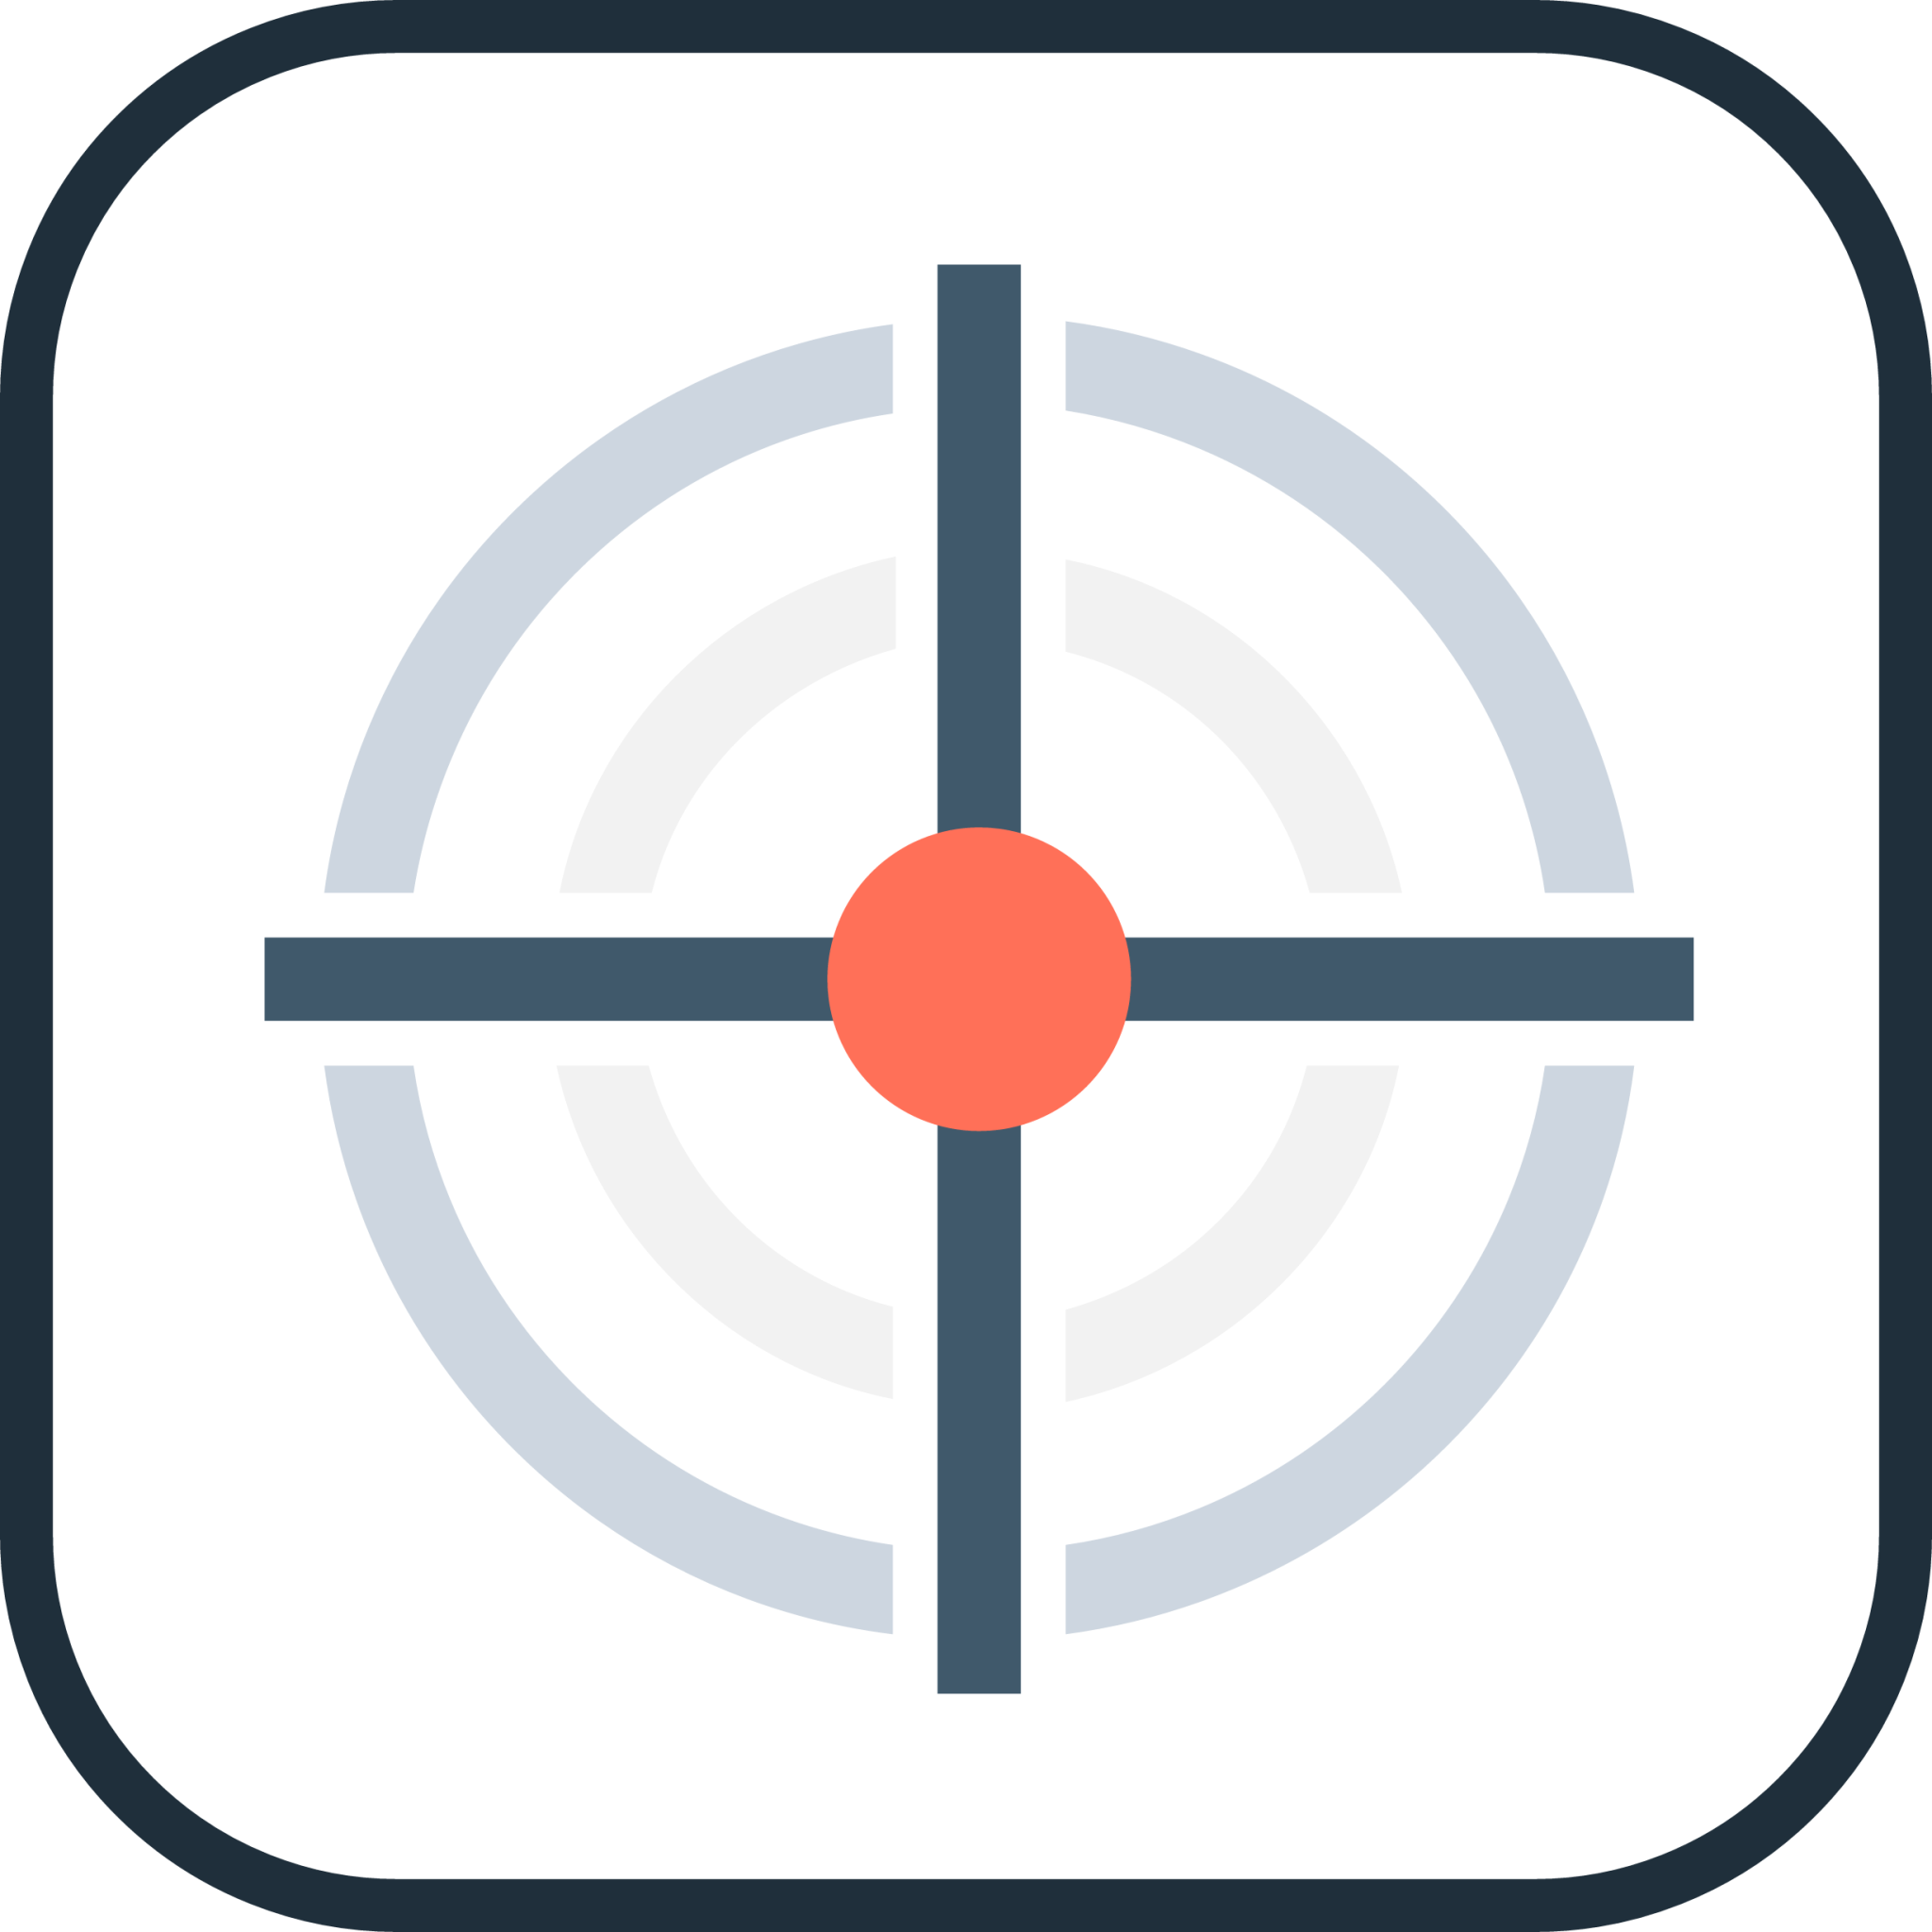 hit targets icon